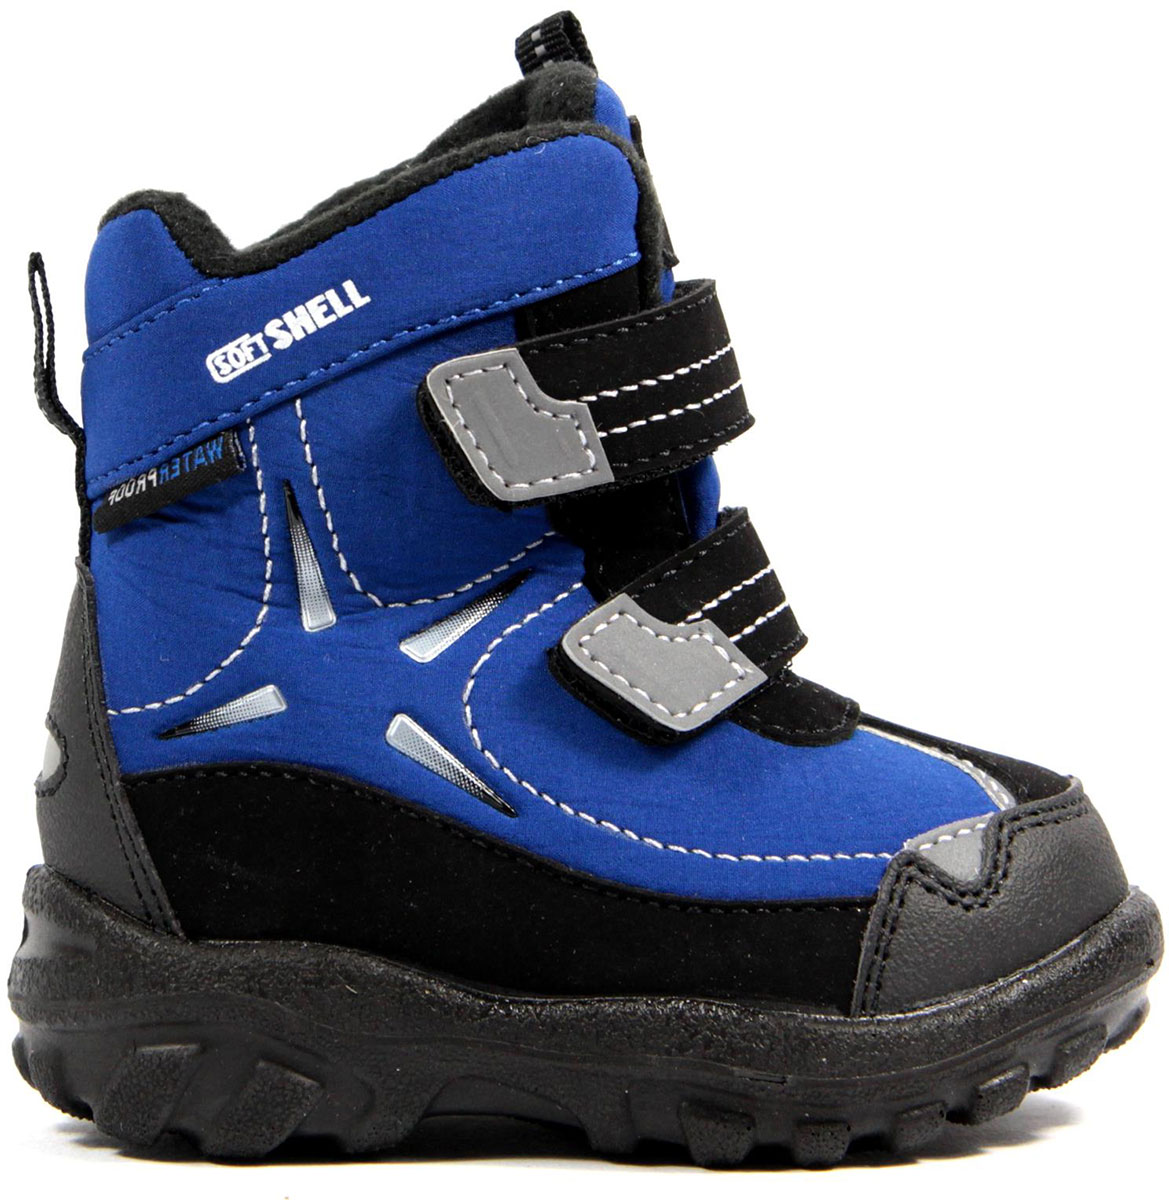 THOR - Children's winter shoes